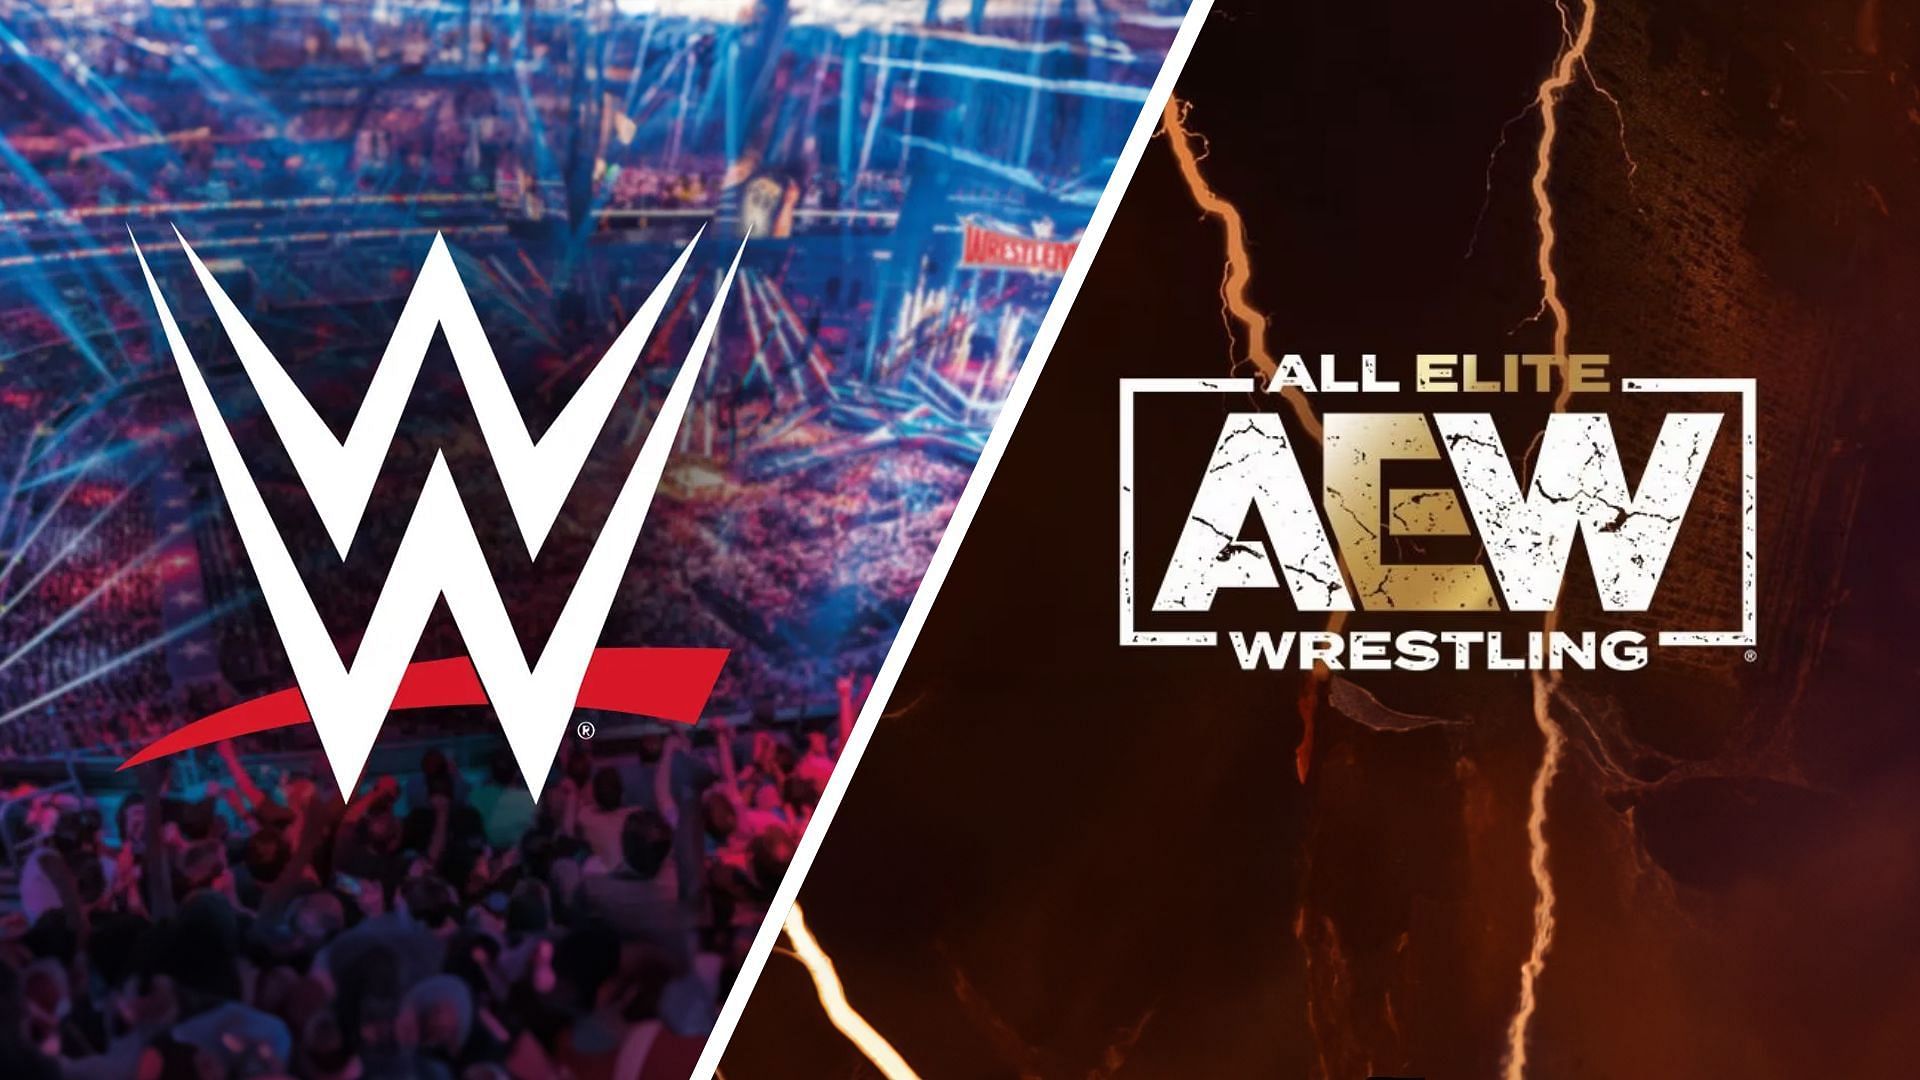 A former AEW competitor was set for a tryout with WWE